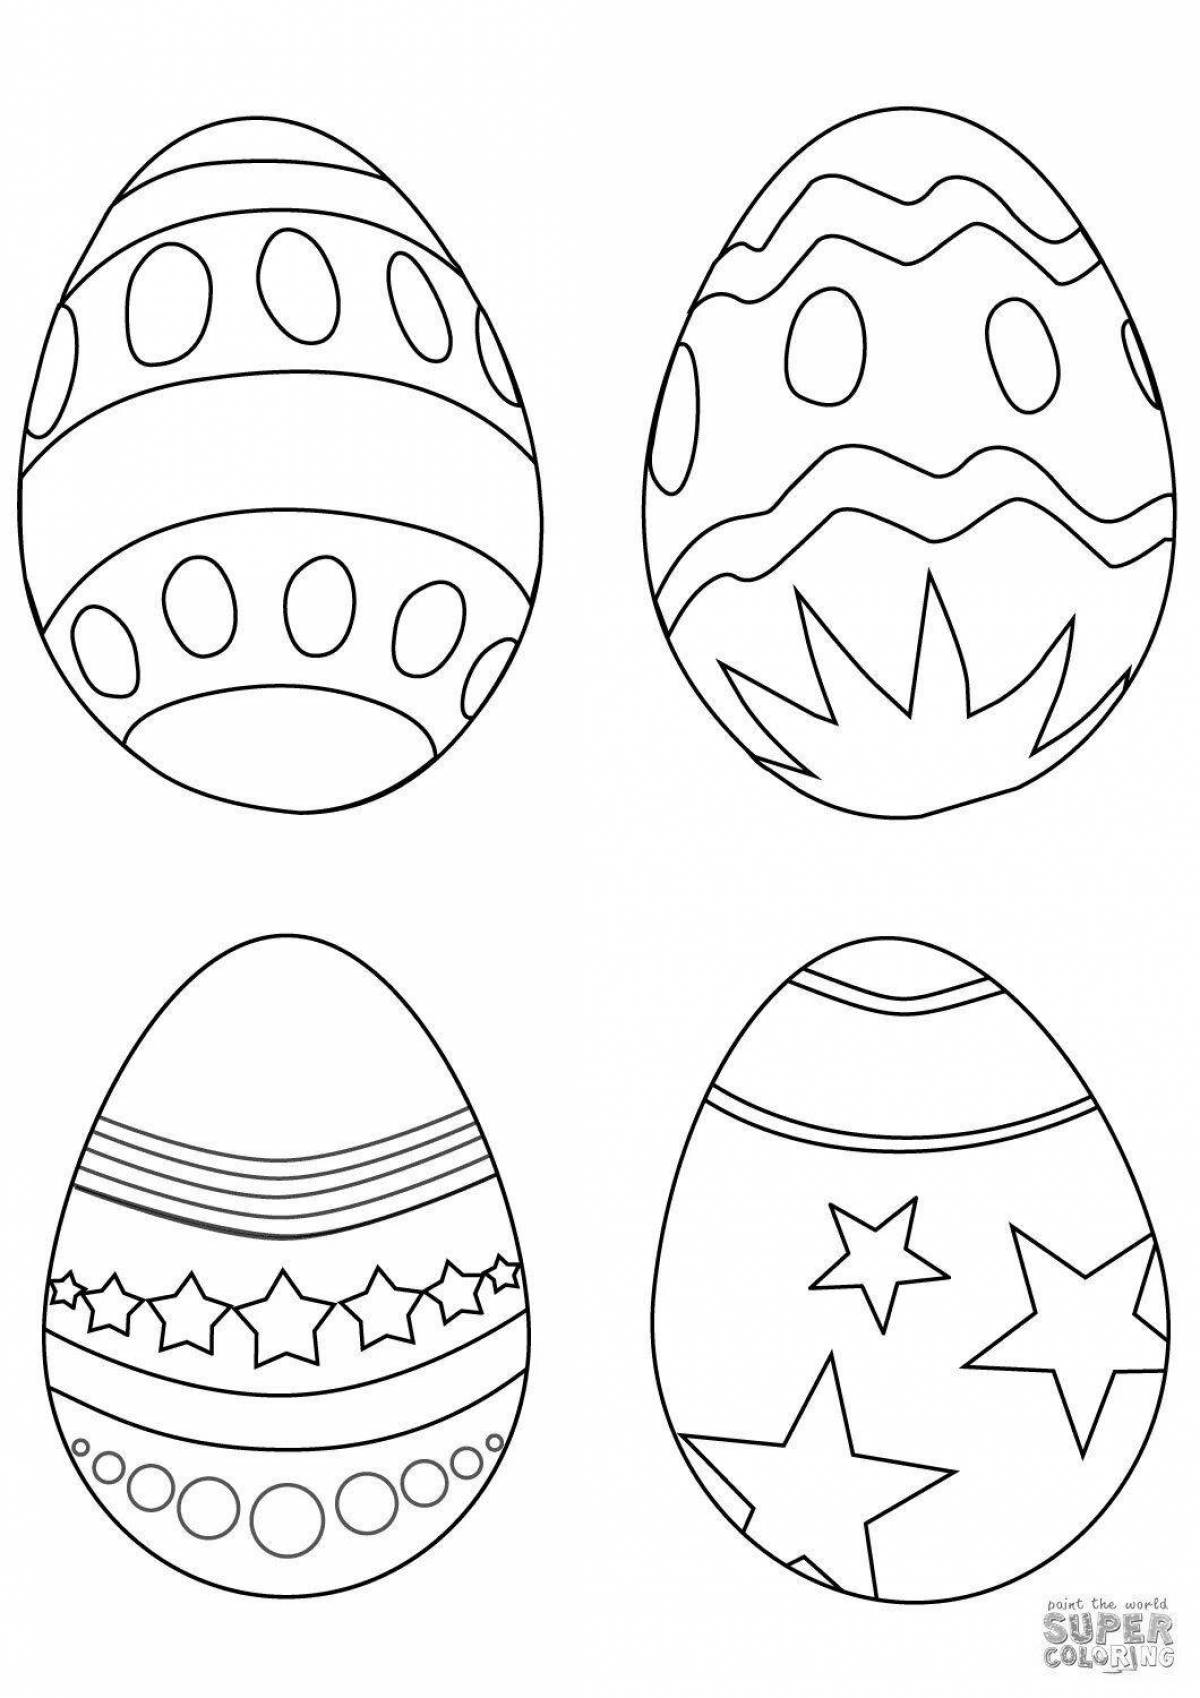 Testicle coloring page live